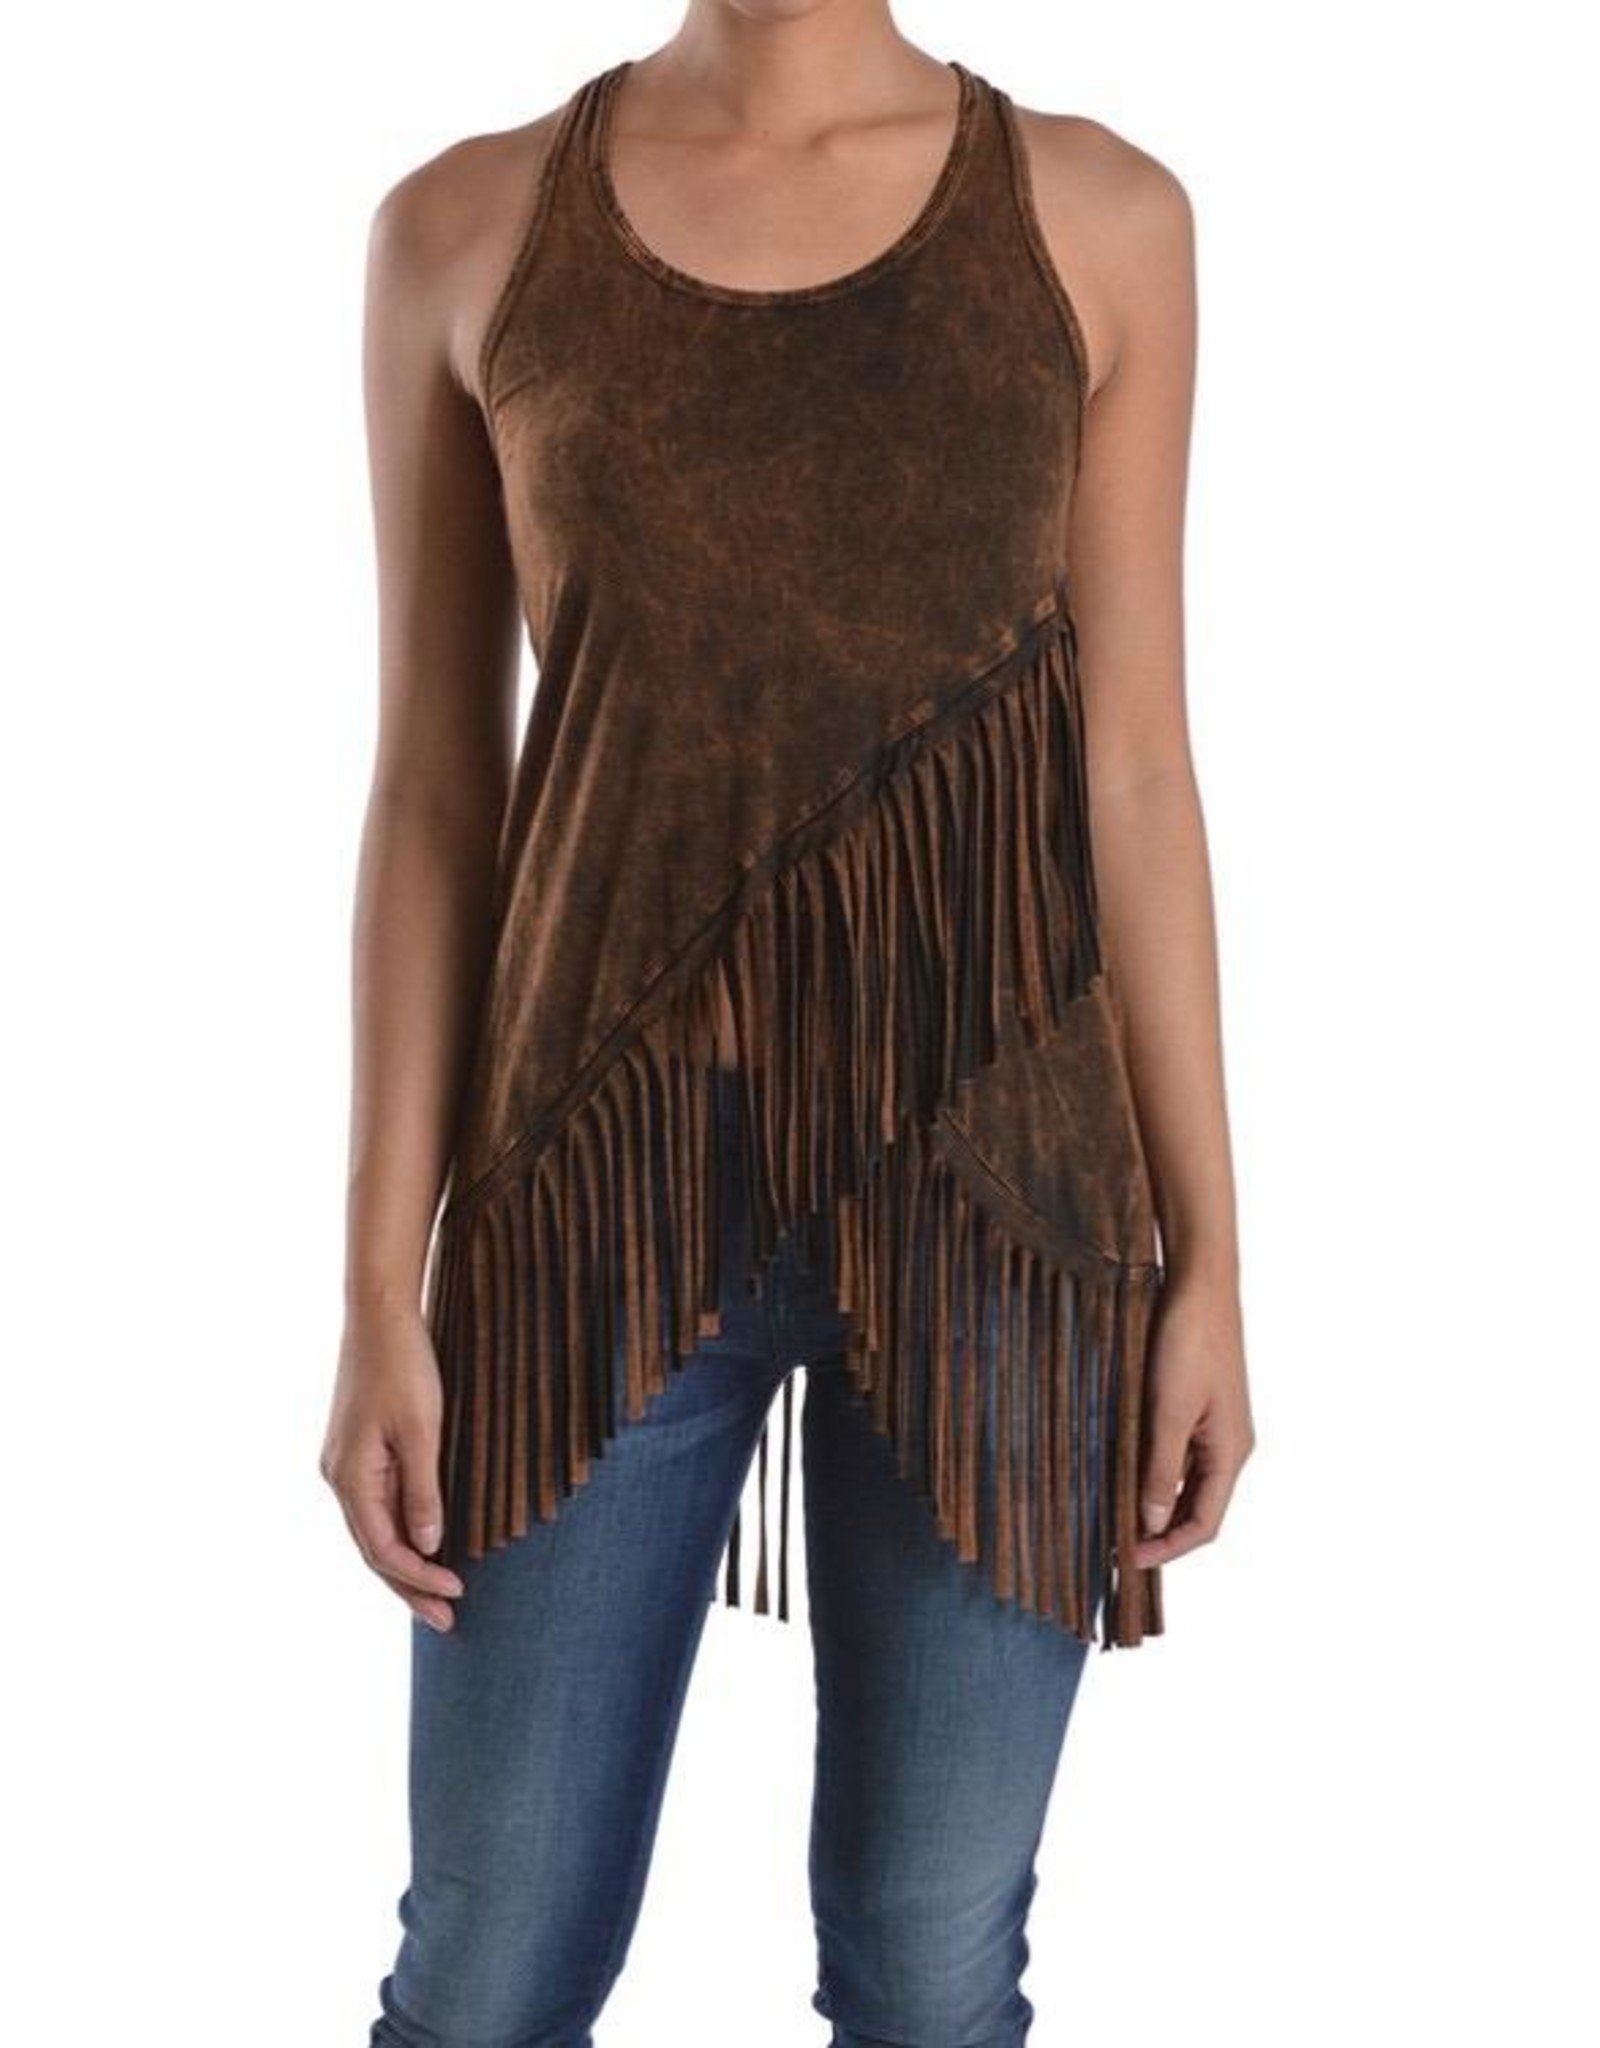 Fringed Mineral Washed Sleeveless Top